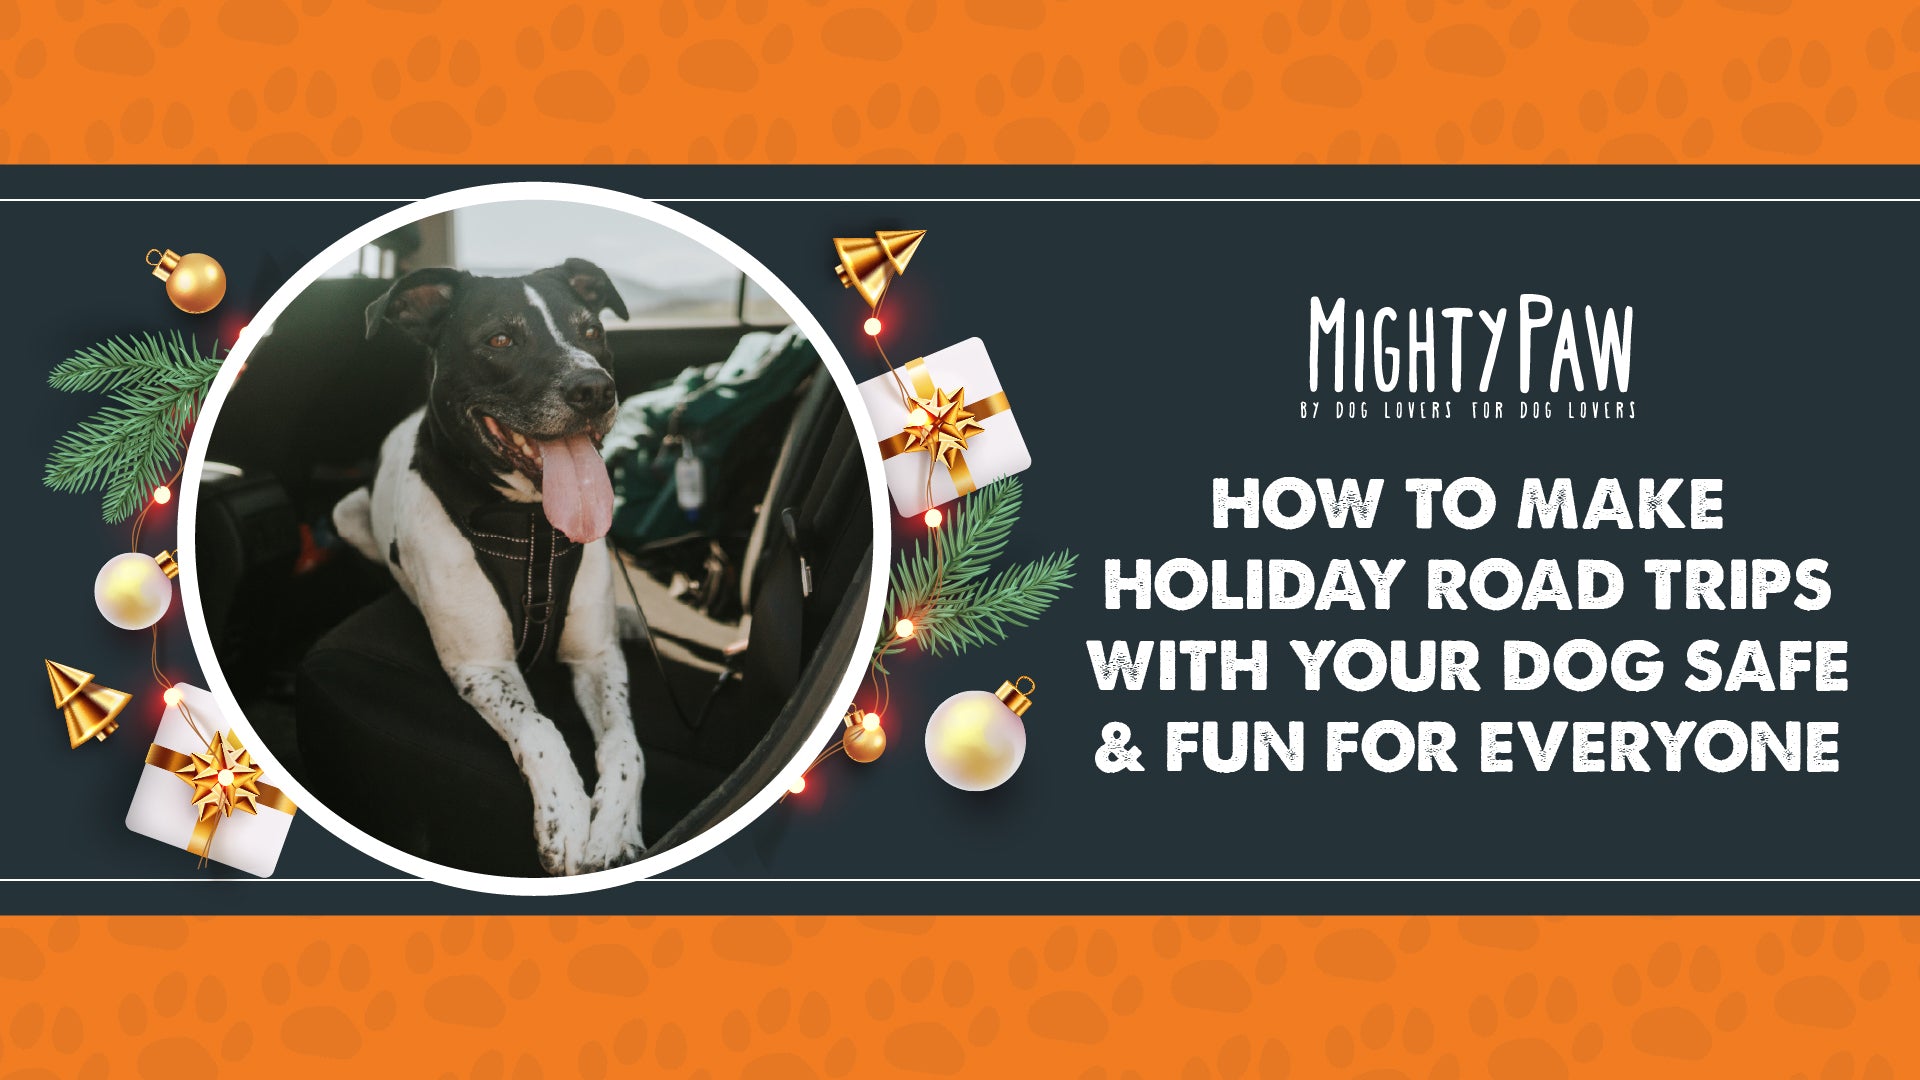 How to make holiday road trips with your dog safe and fun for everyone